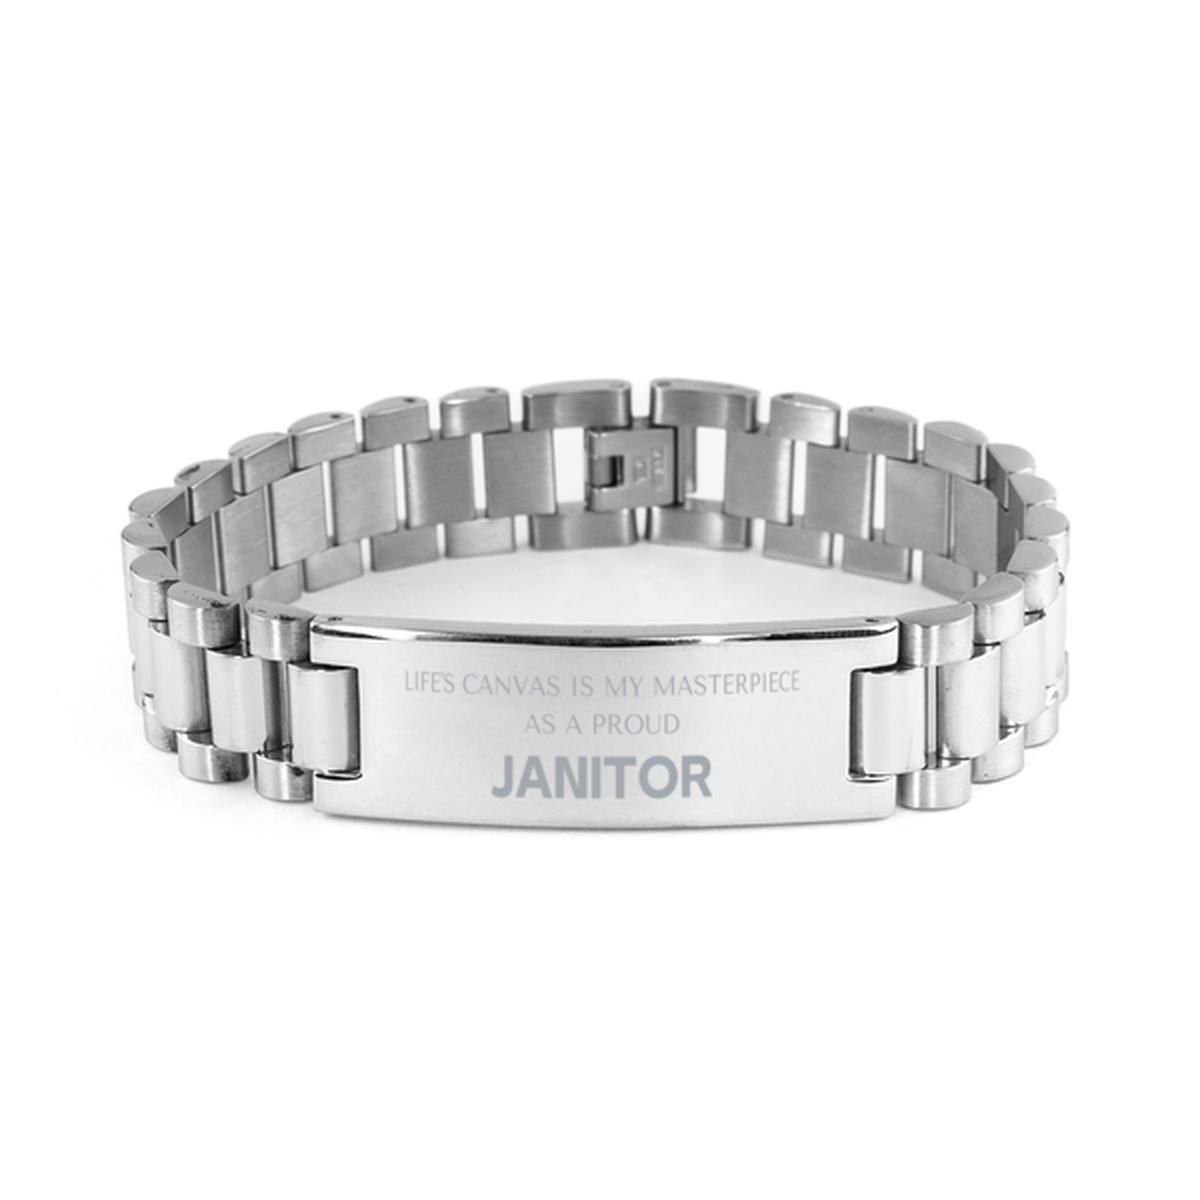 Proud Janitor Gifts, Life's canvas is my masterpiece, Epic Birthday Christmas Unique Ladder Stainless Steel Bracelet For Janitor, Coworkers, Men, Women, Friends